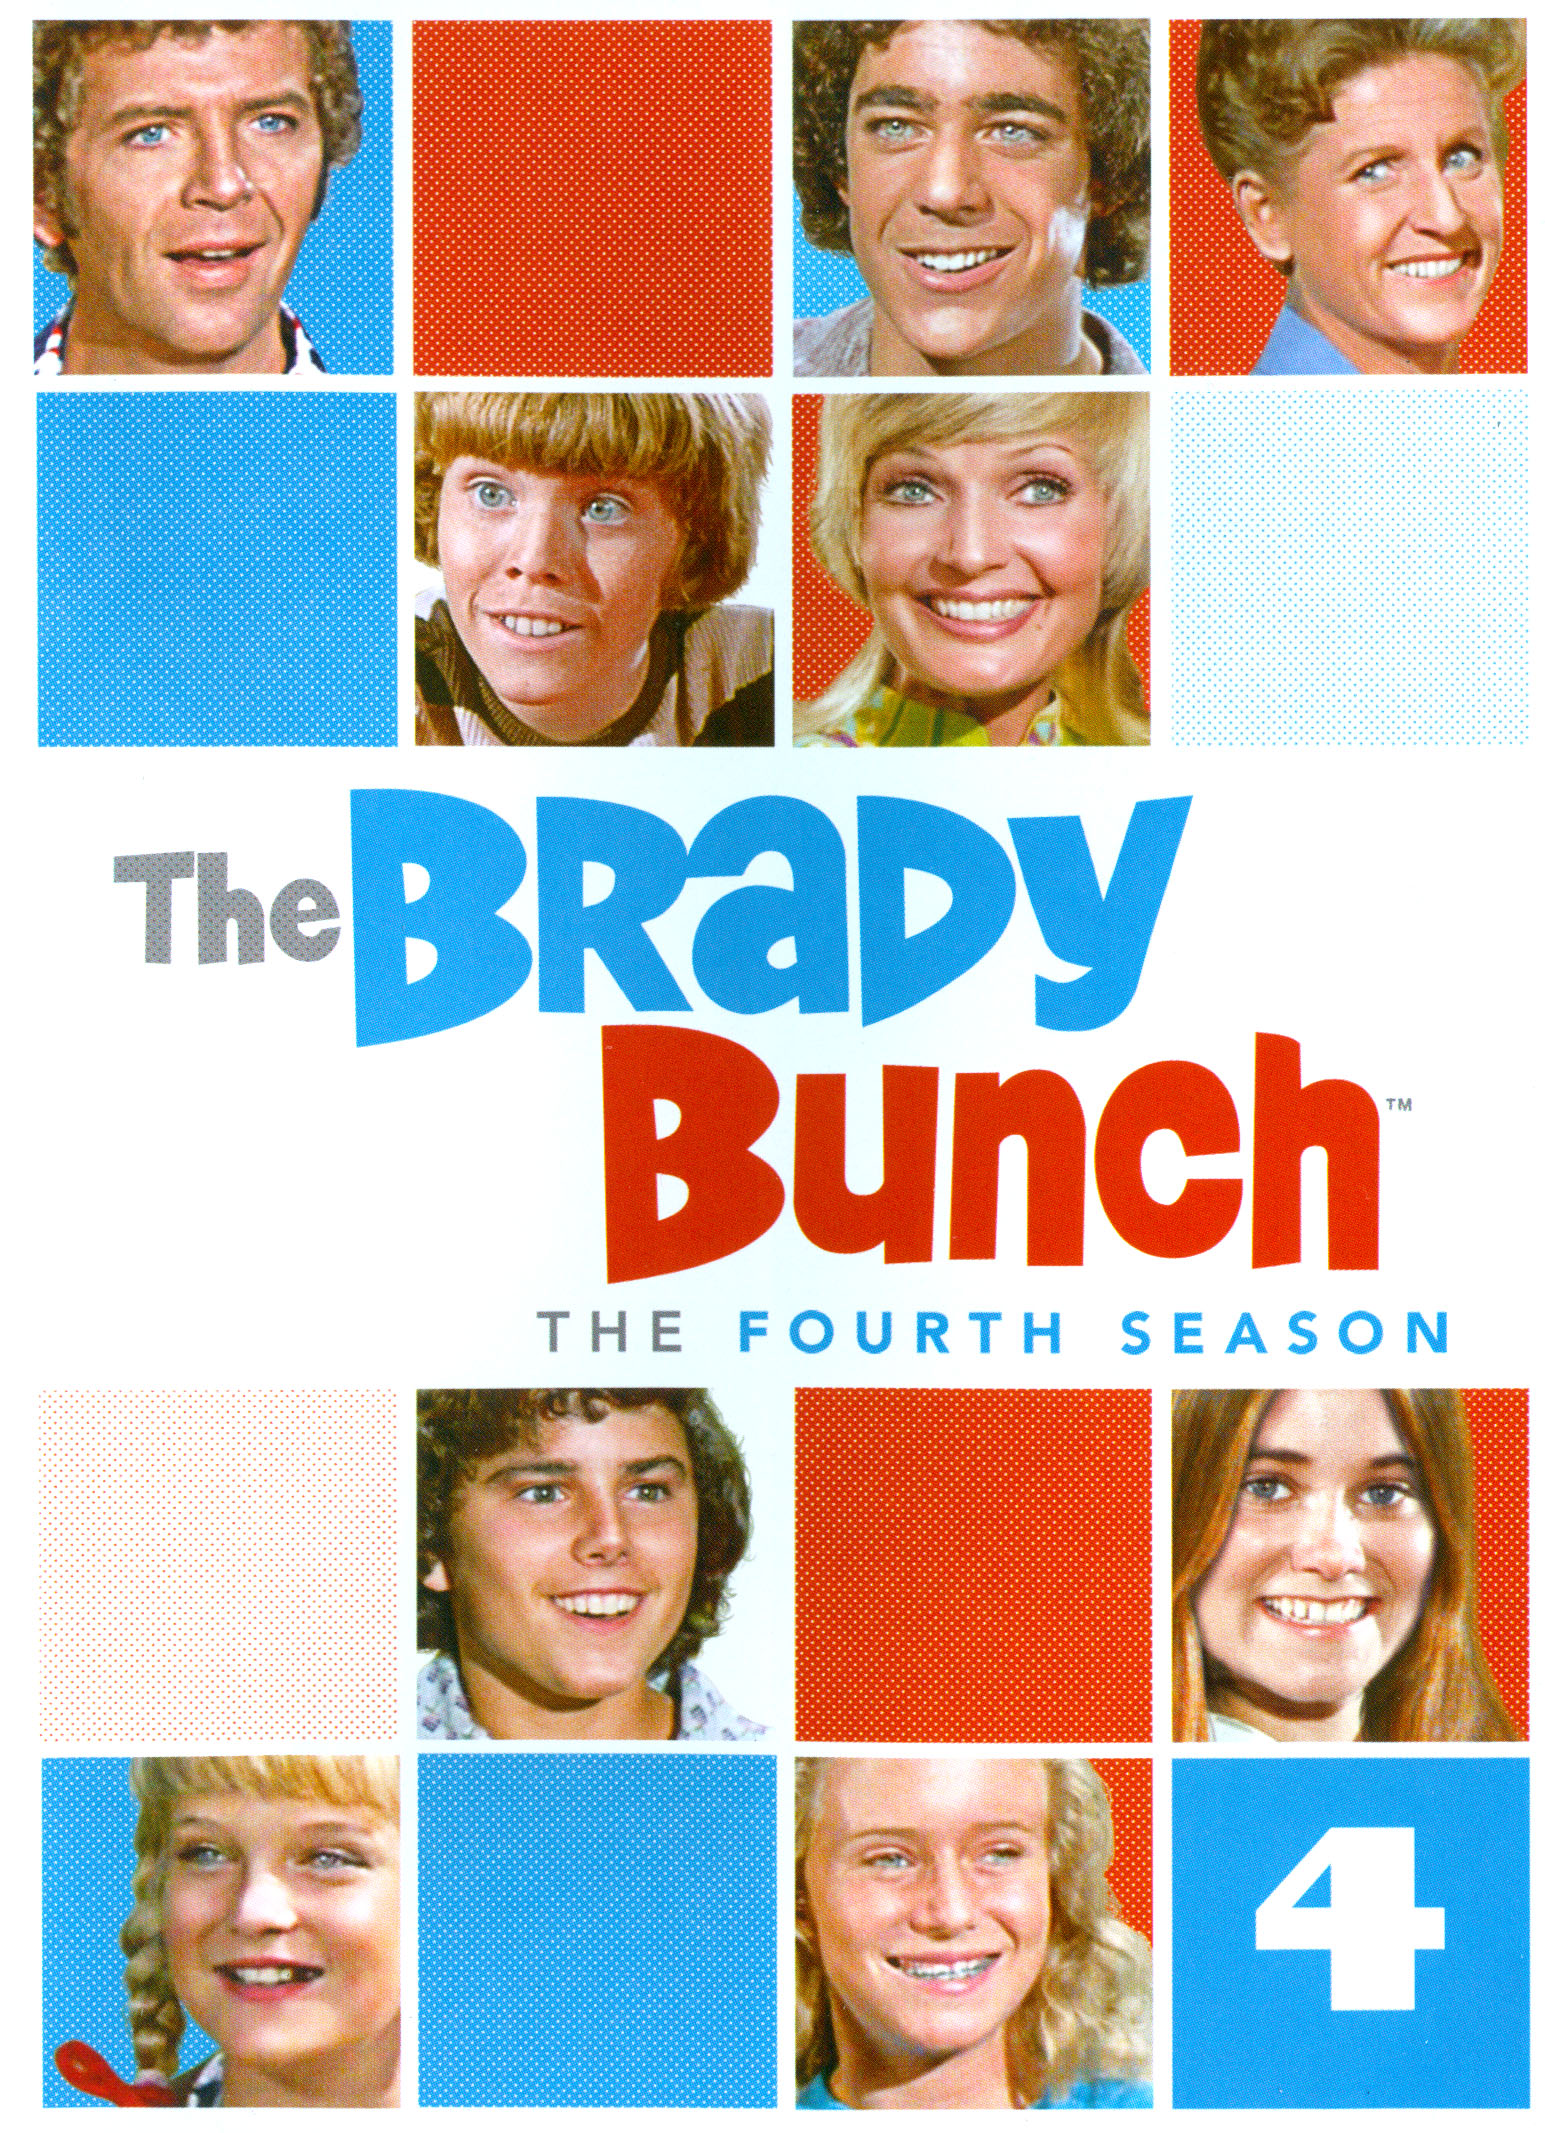 The Brady Bunch The Complete Fourth Season Discs DVD Best Buy